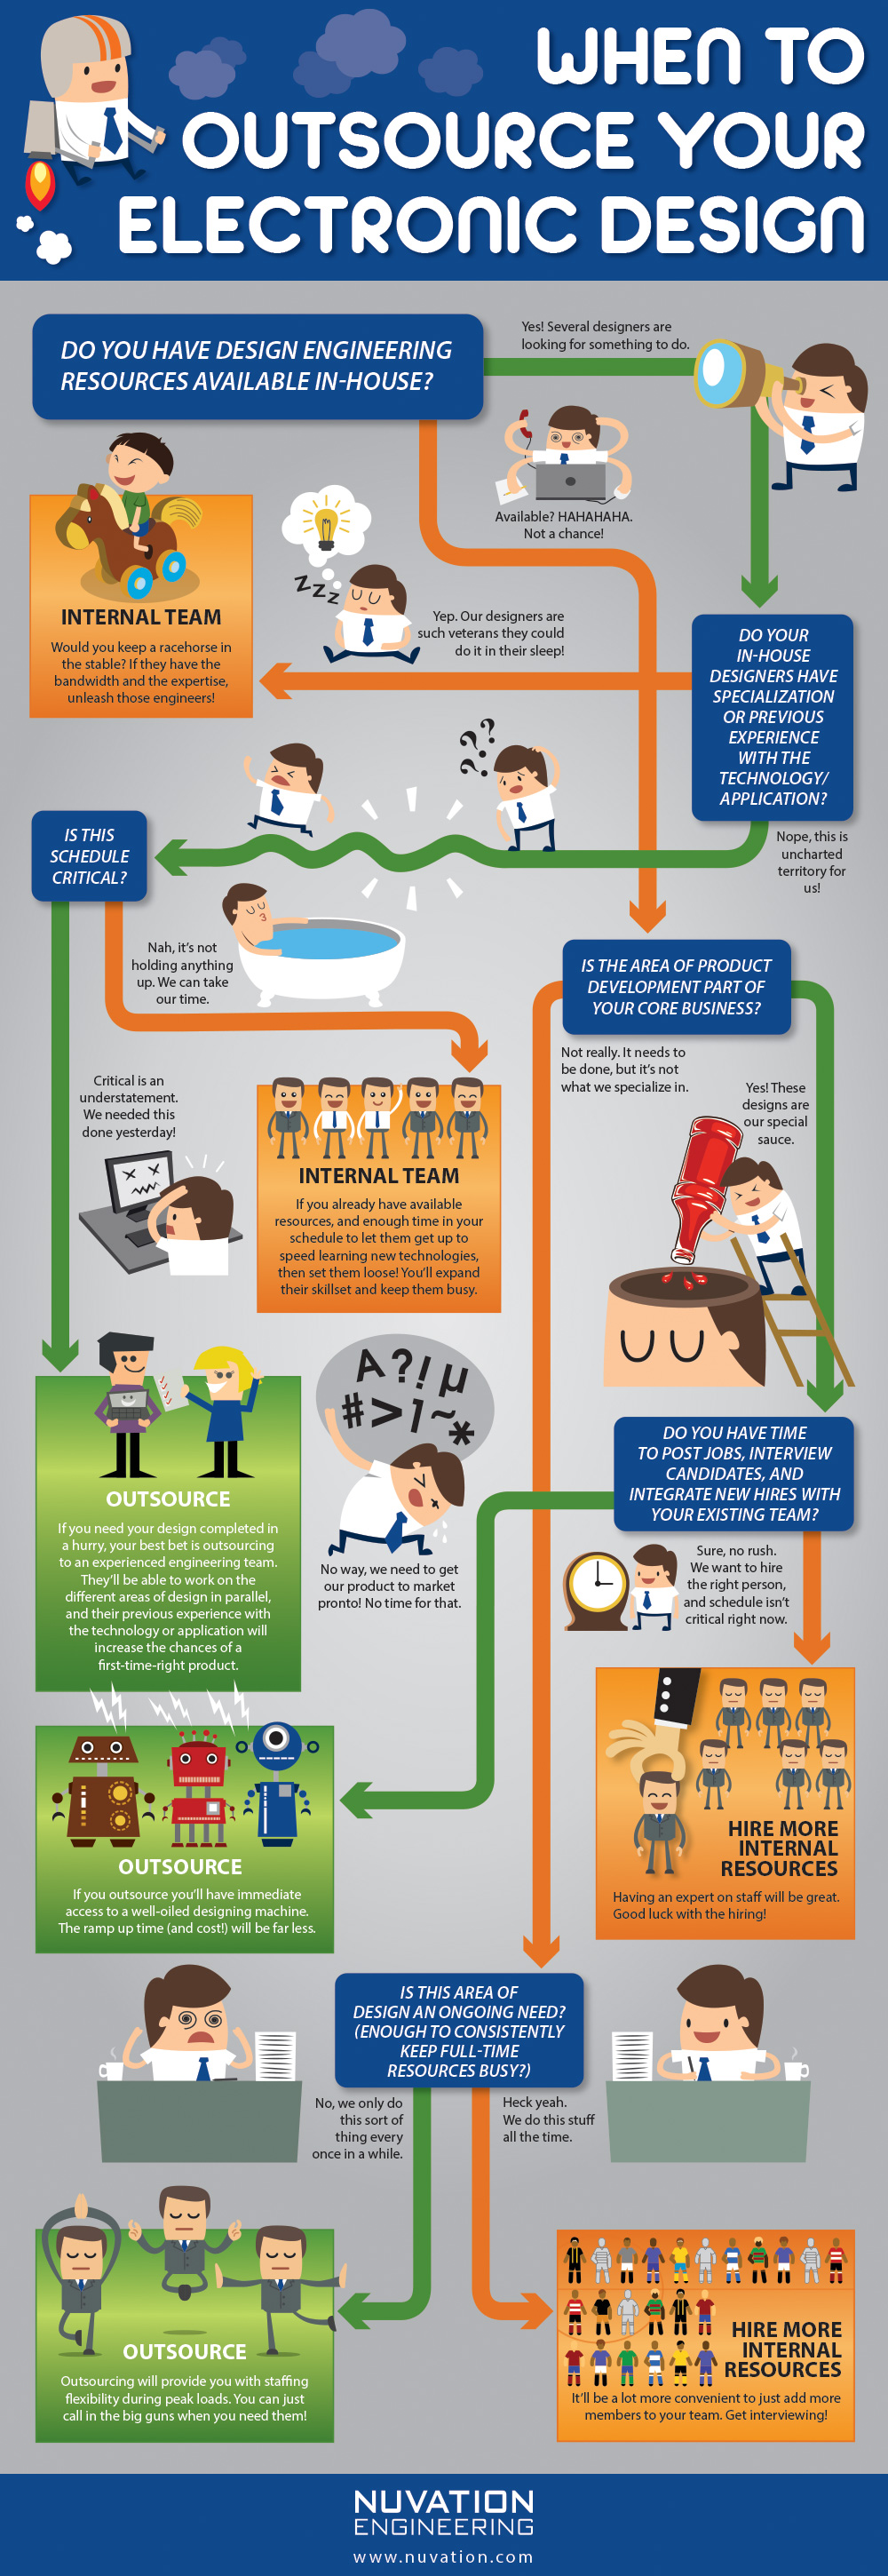 When to Outsource Your Electronic Design Flowchart